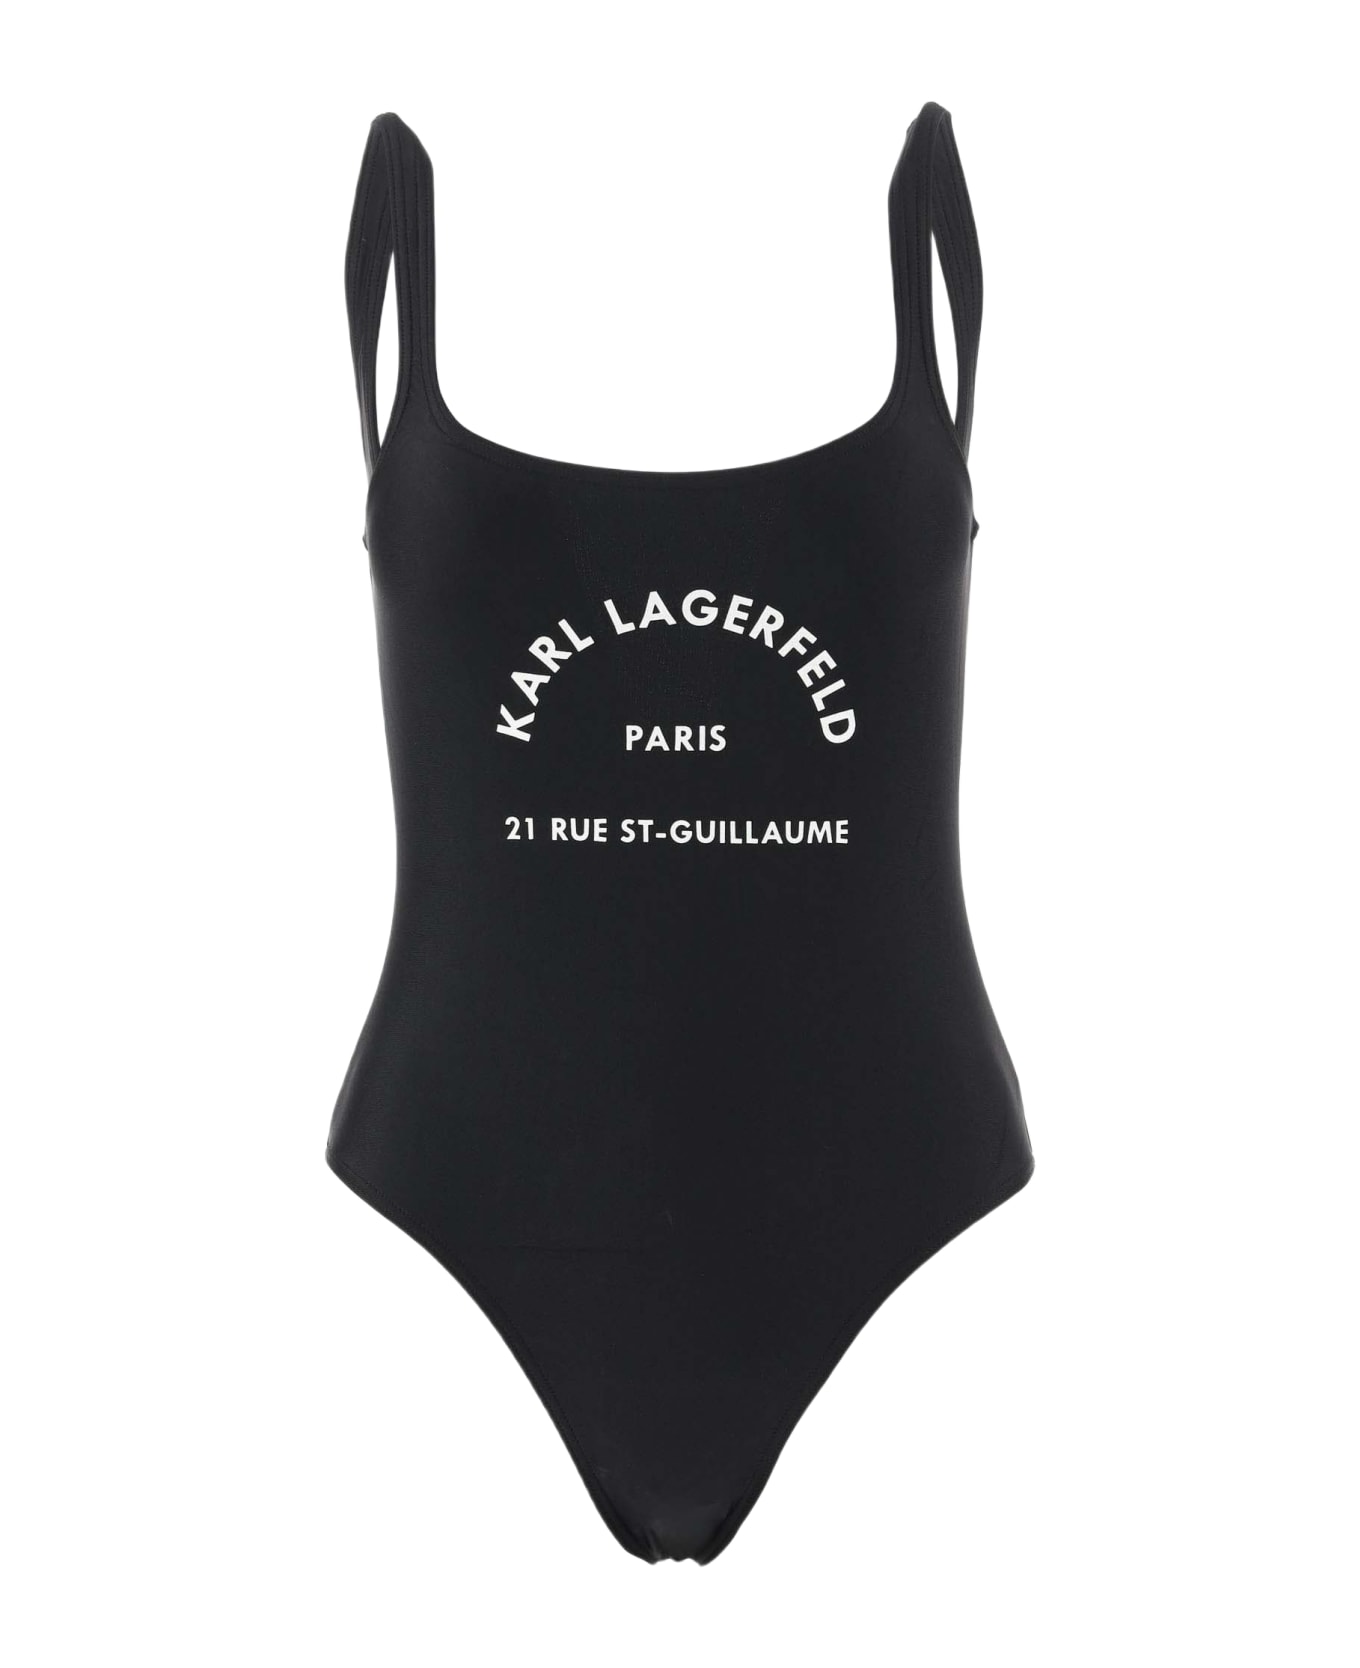 Karl Lagerfeld One-piece Swimsuit Rue St-guillaume - Black